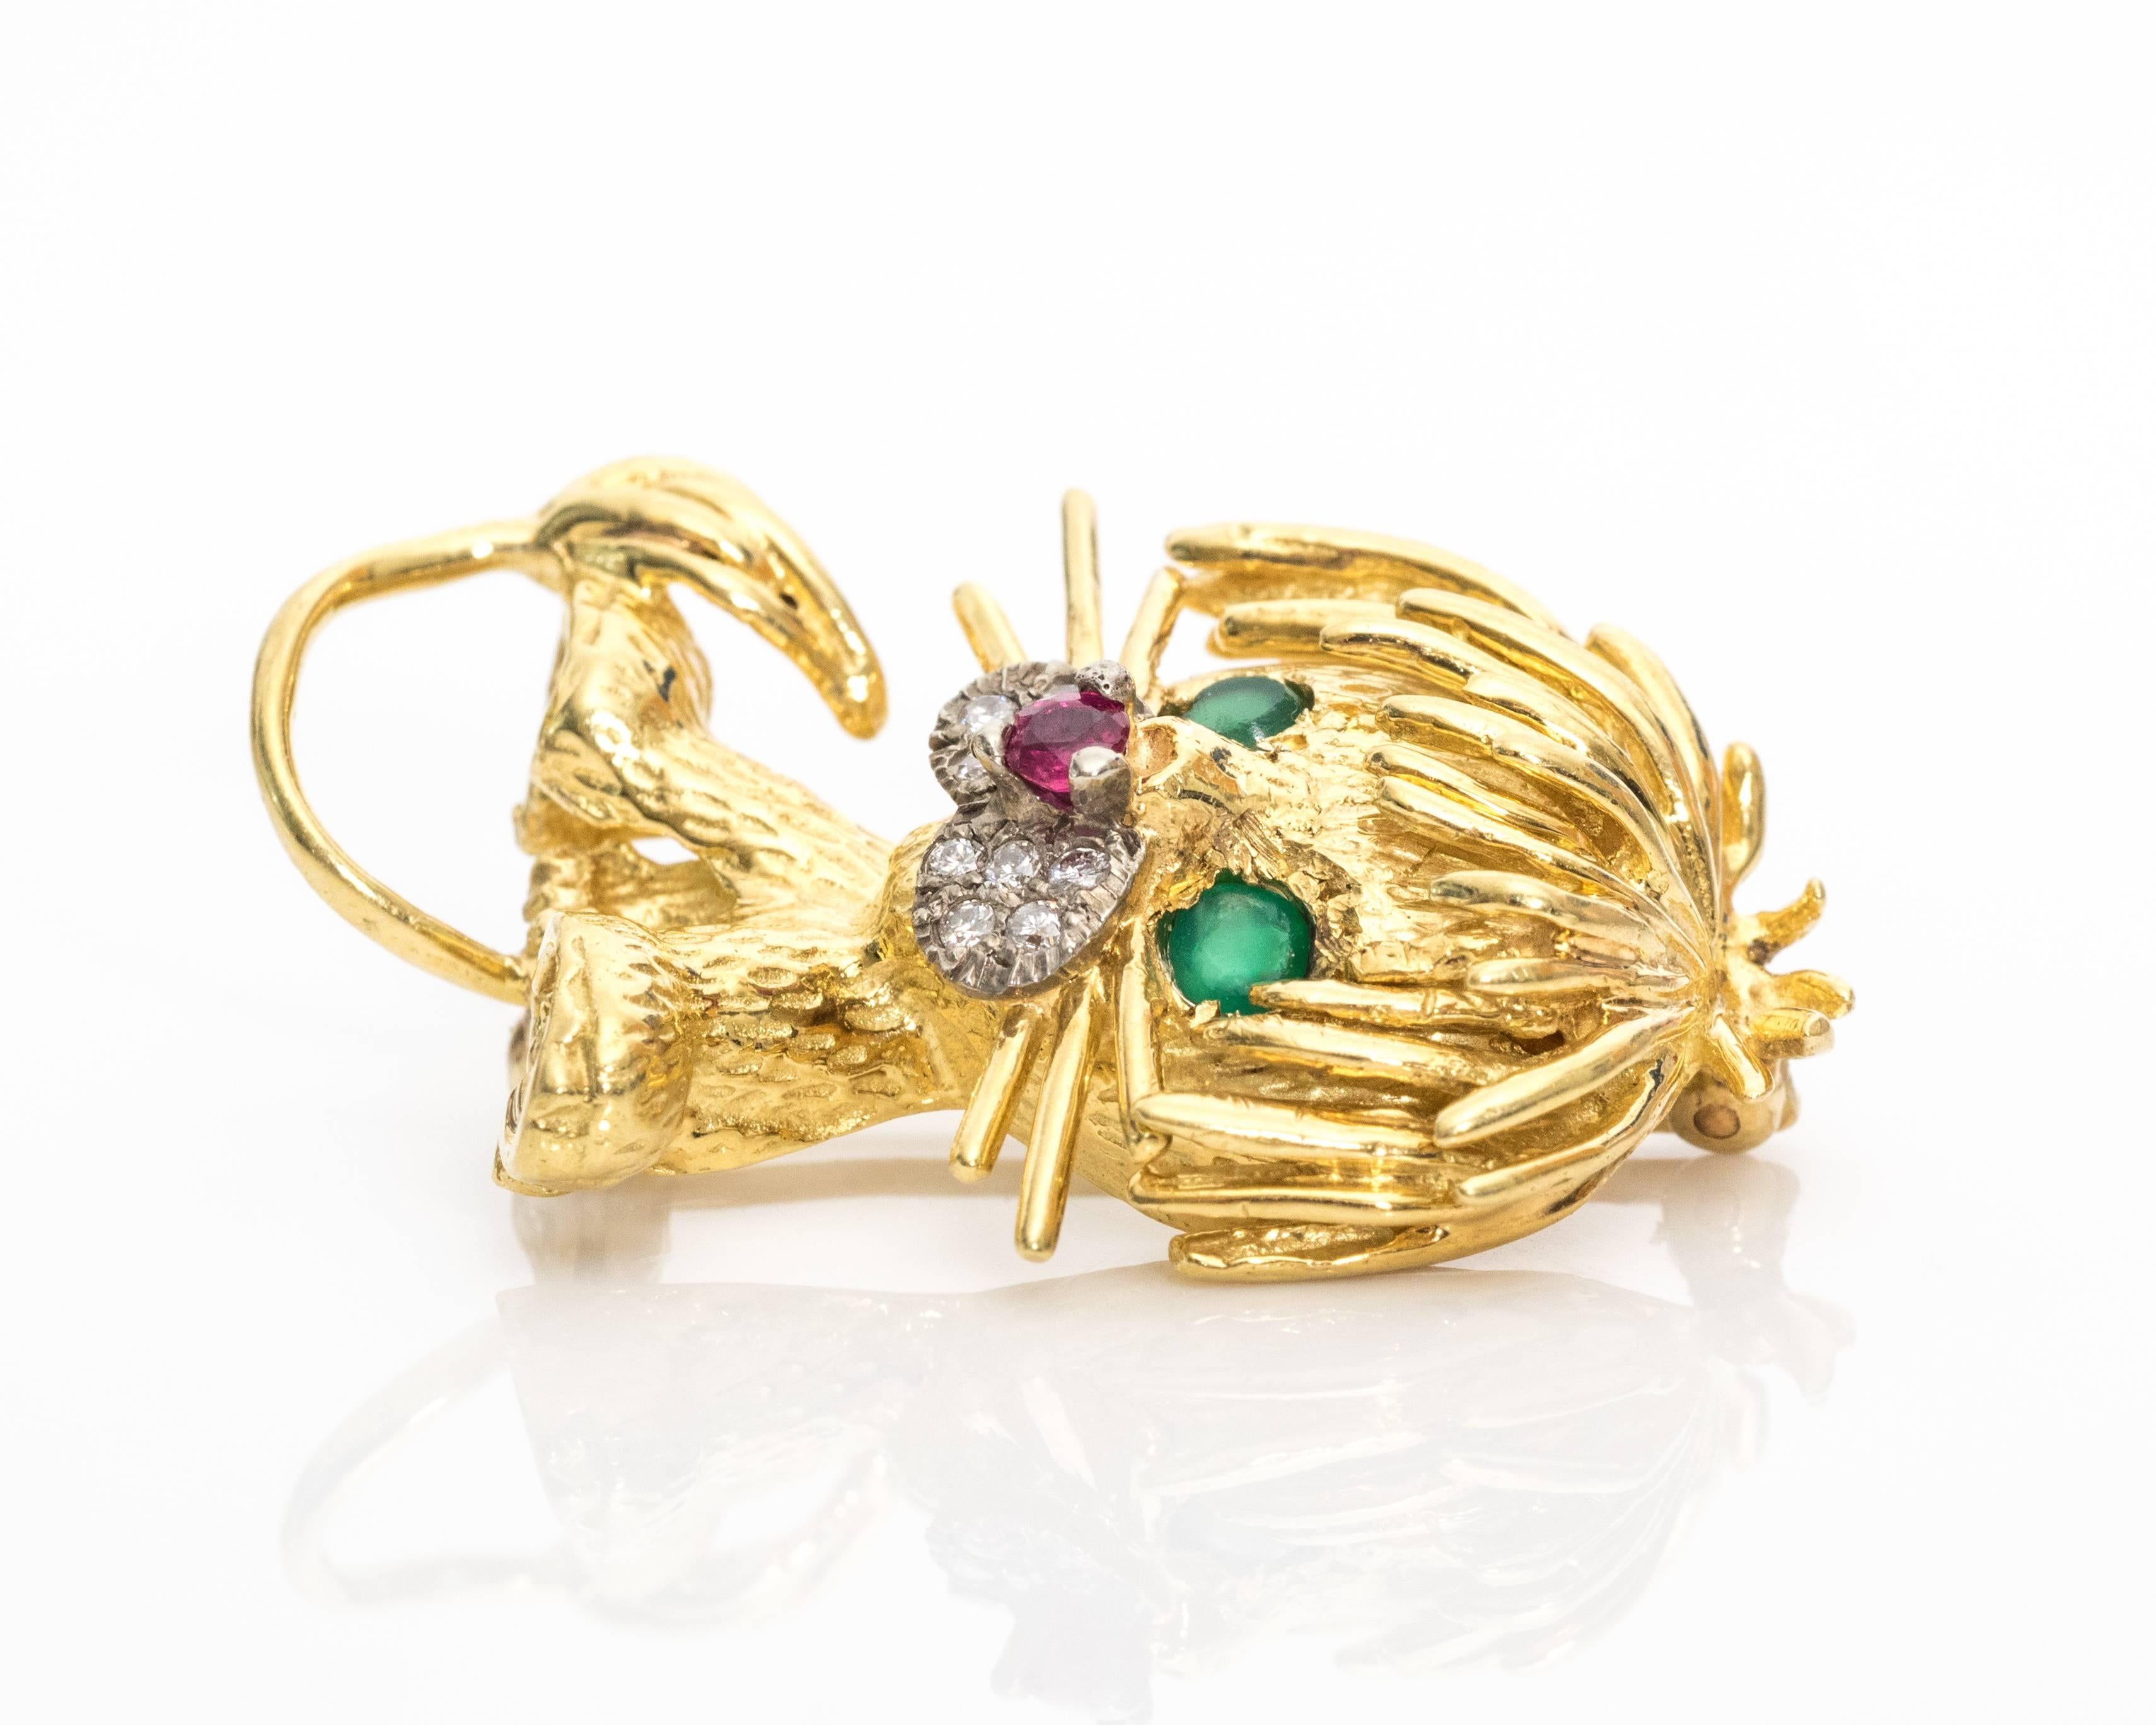 1950s Retro French Lion Brooch with 18 Karat Yellow Gold, Diamonds, Emeralds, Ruby. Features Emerald eyes, Ruby nose and Diamond muzzle with textured 18K gold body, mane, face, tail and whiskers. Ruby and diamonds are prong set. 
This exquisitely